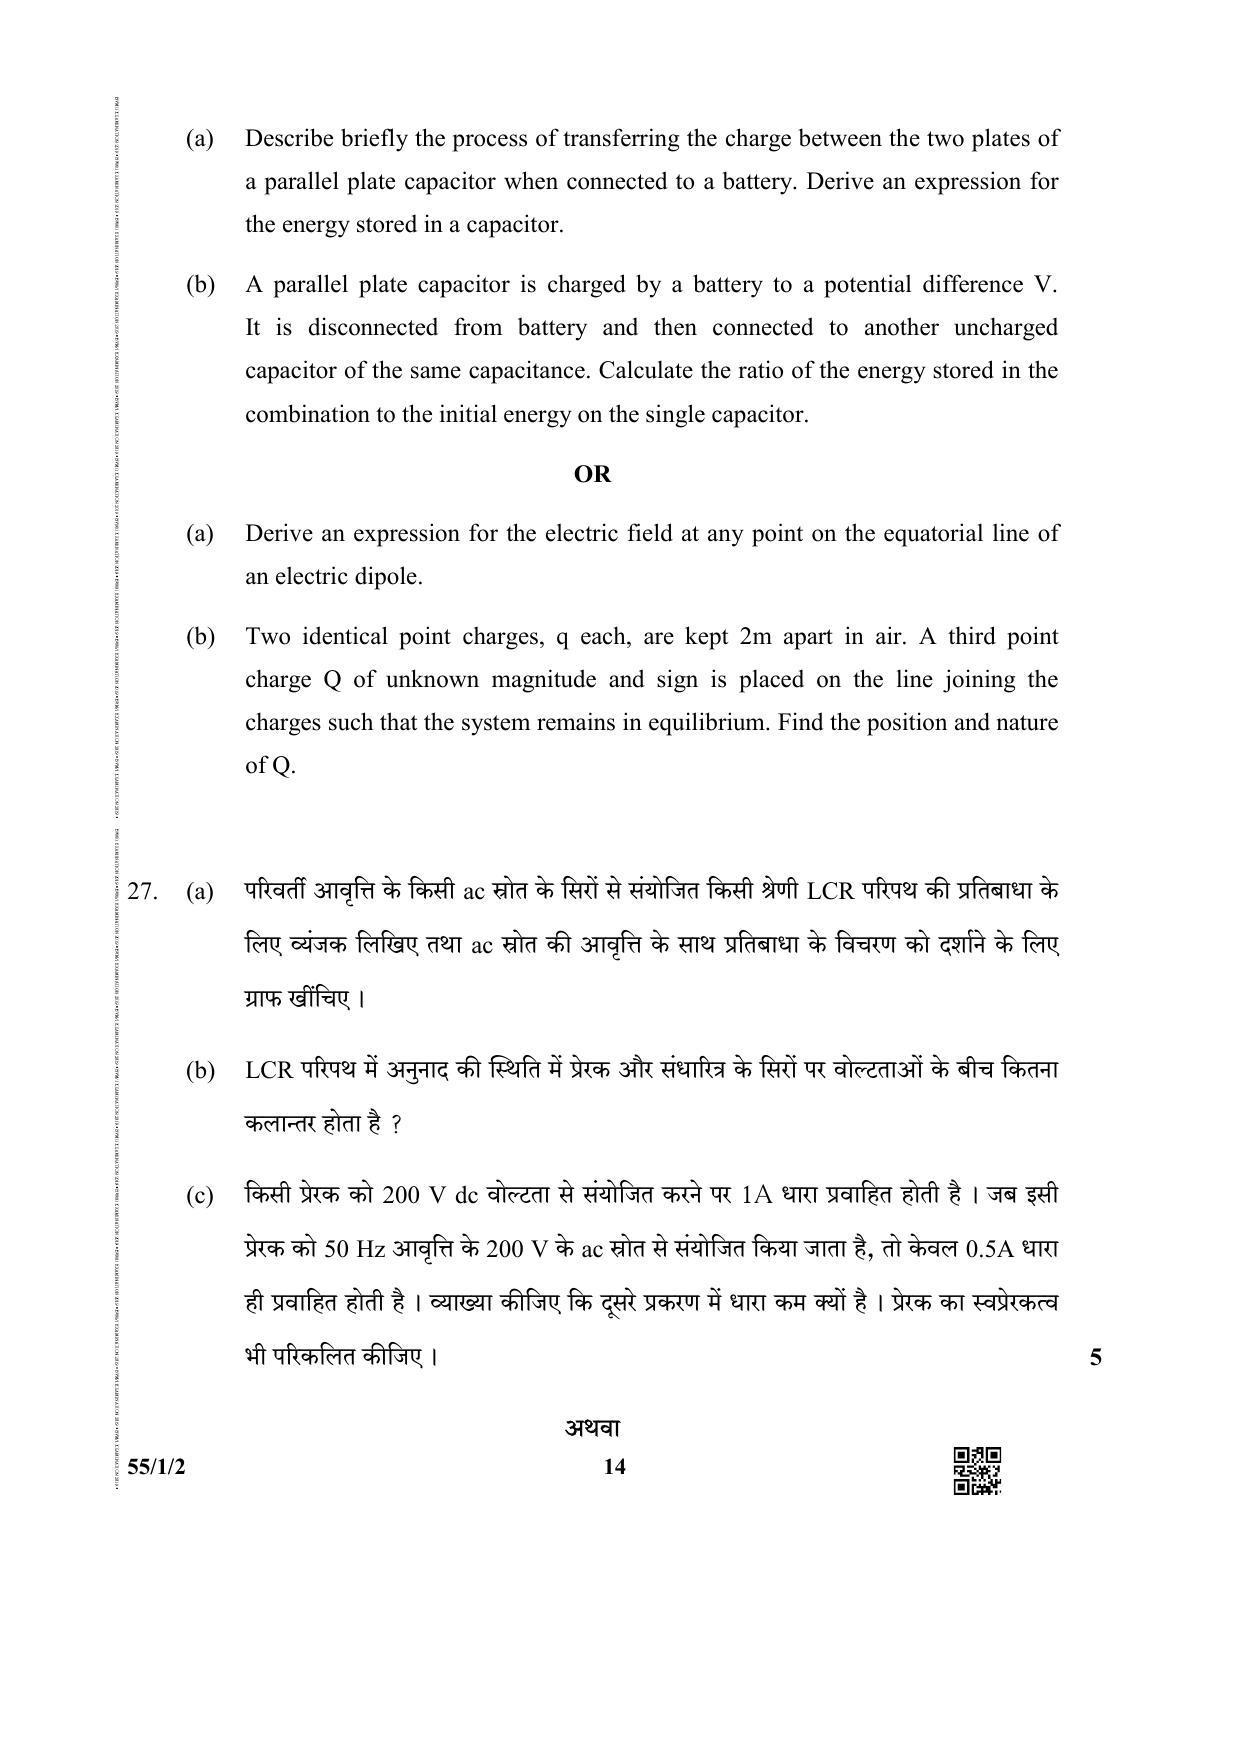 CBSE Class 12 55-1-2 (Physics) 2019 Question Paper - Page 14